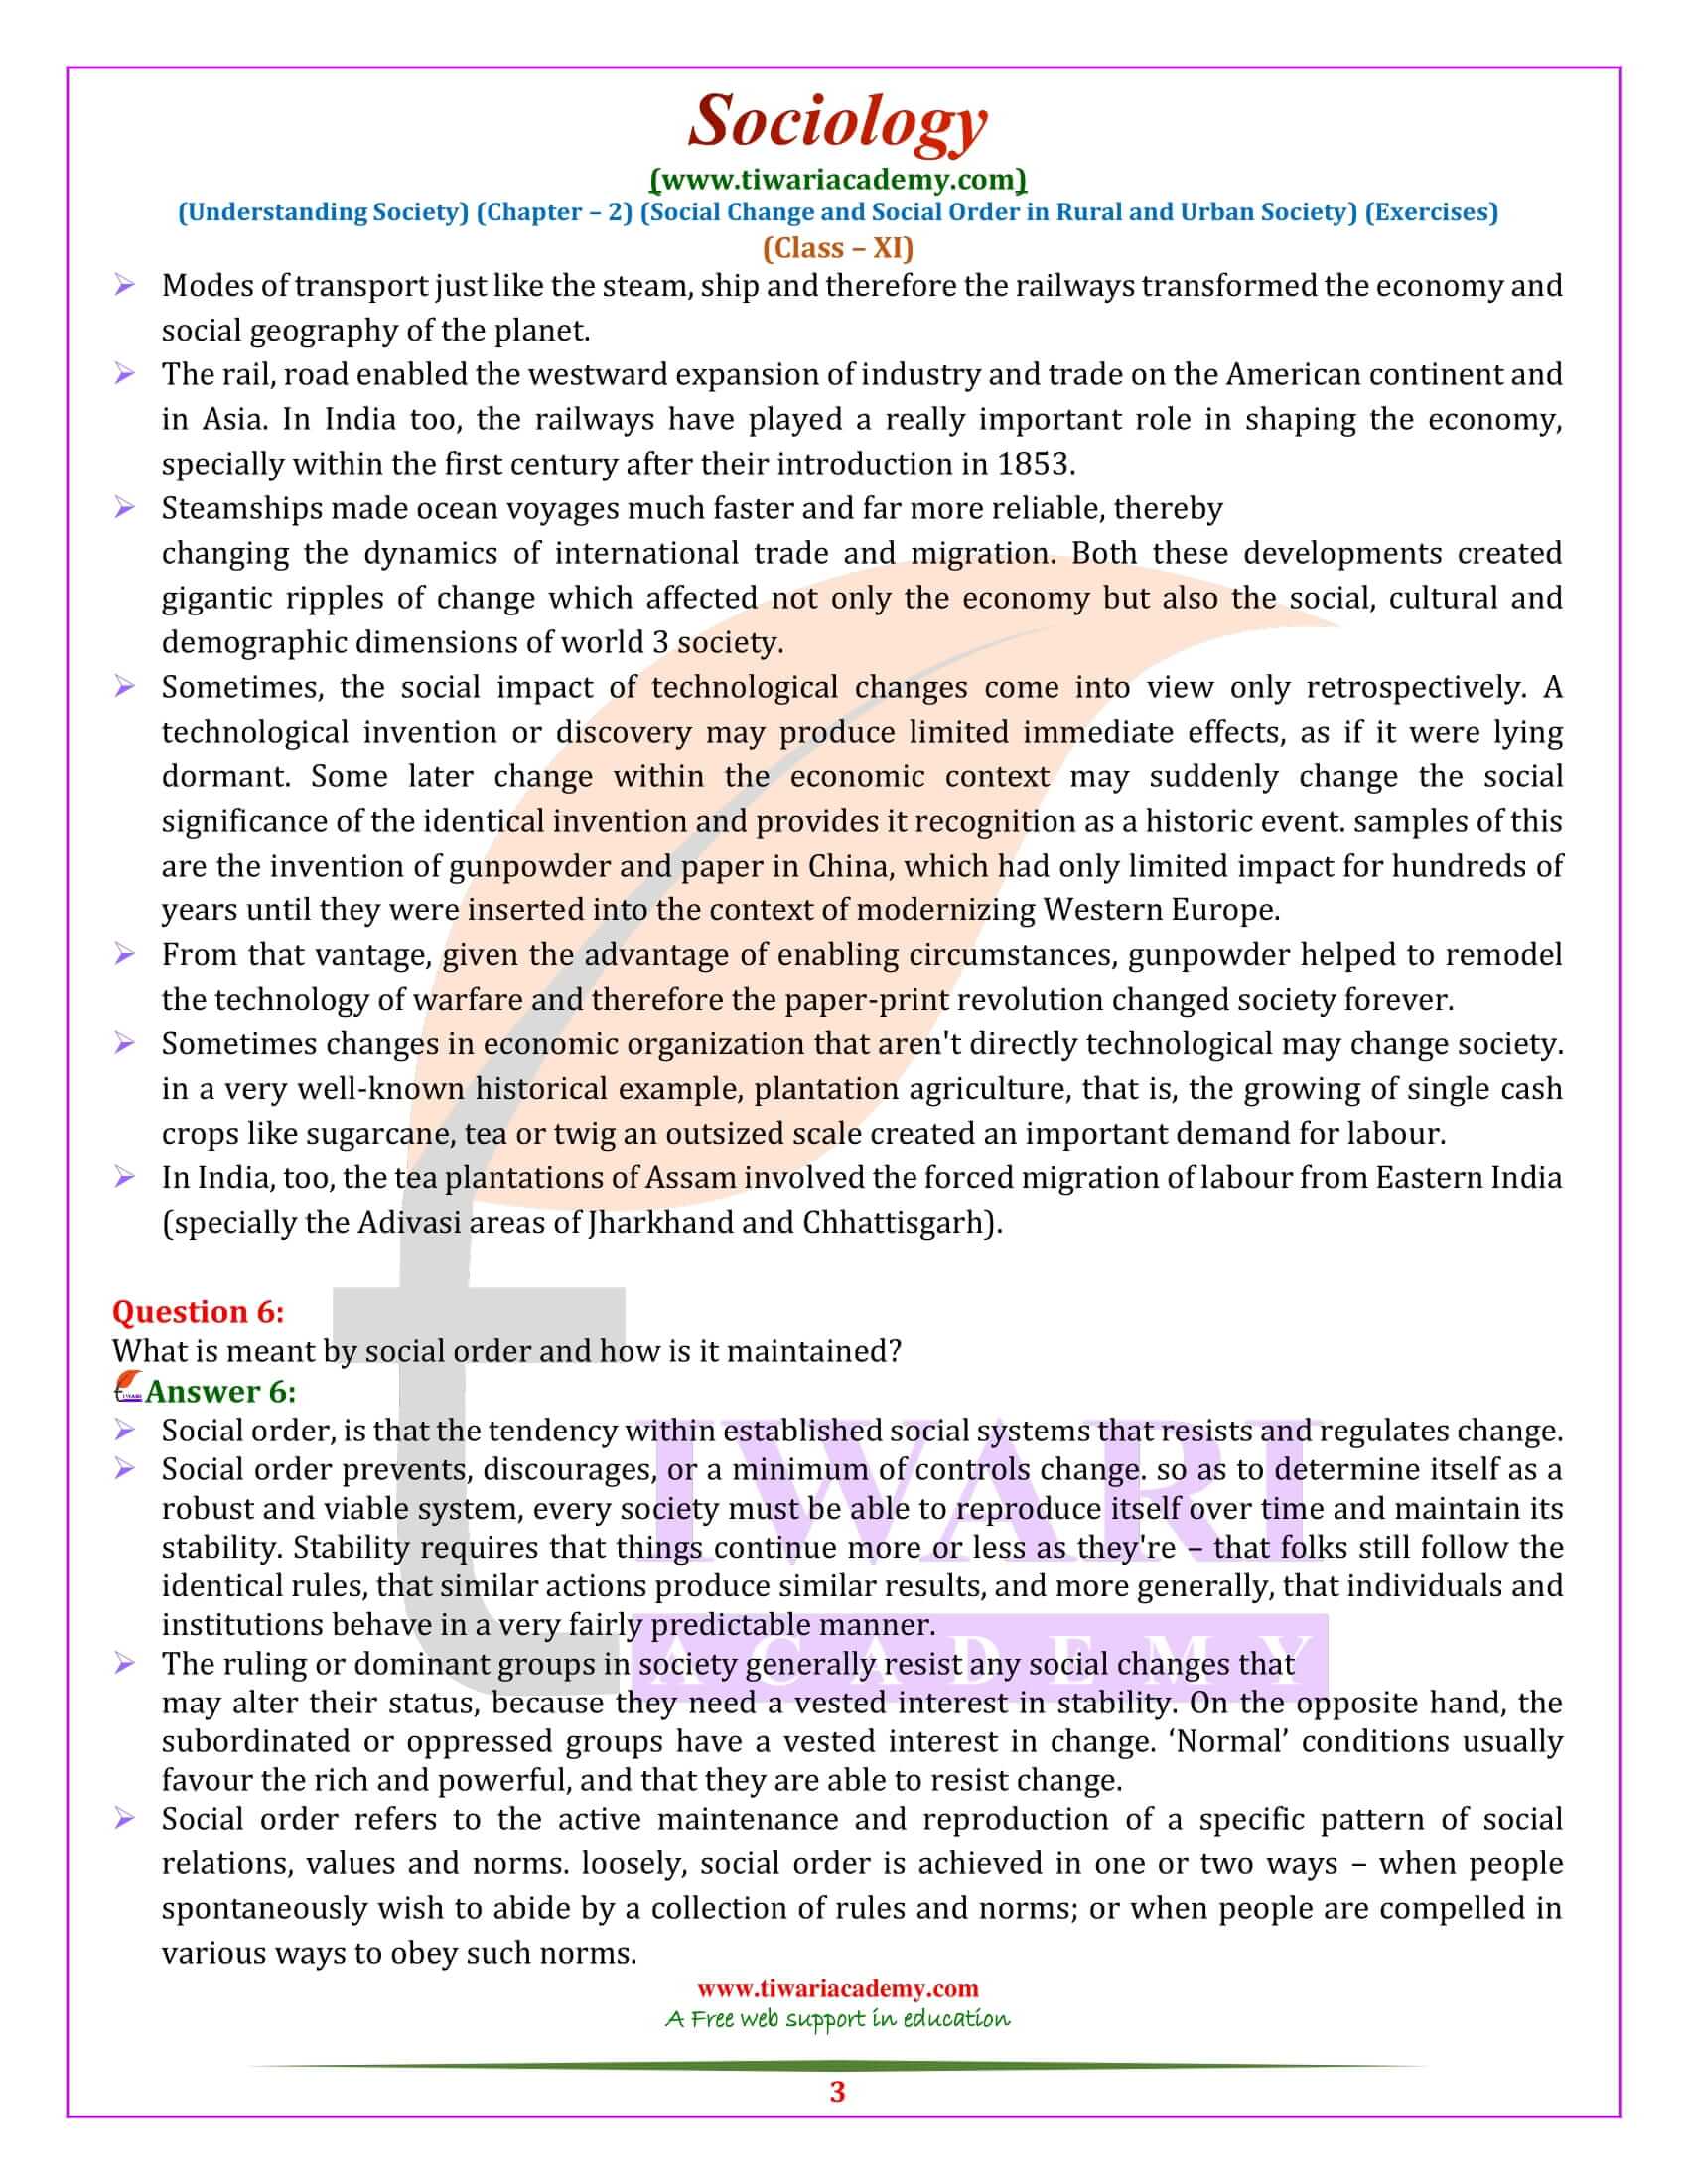 NCERT Solutions for Class 11 Sociology Chapter 2